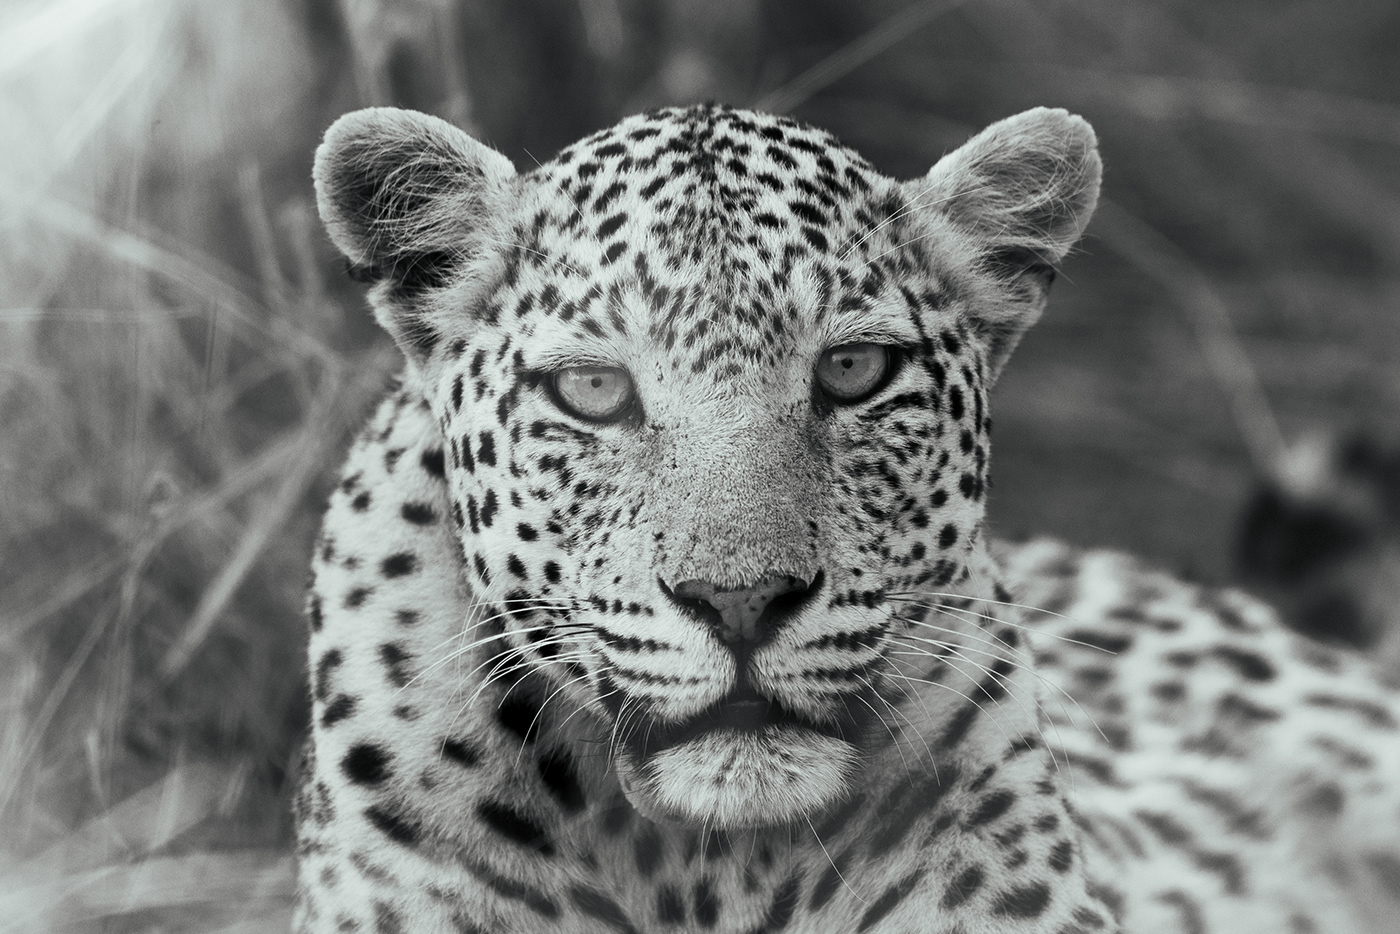 africa animal photography animals black & white black and white earth nature photography wildlife wildlife art Wildlife photography